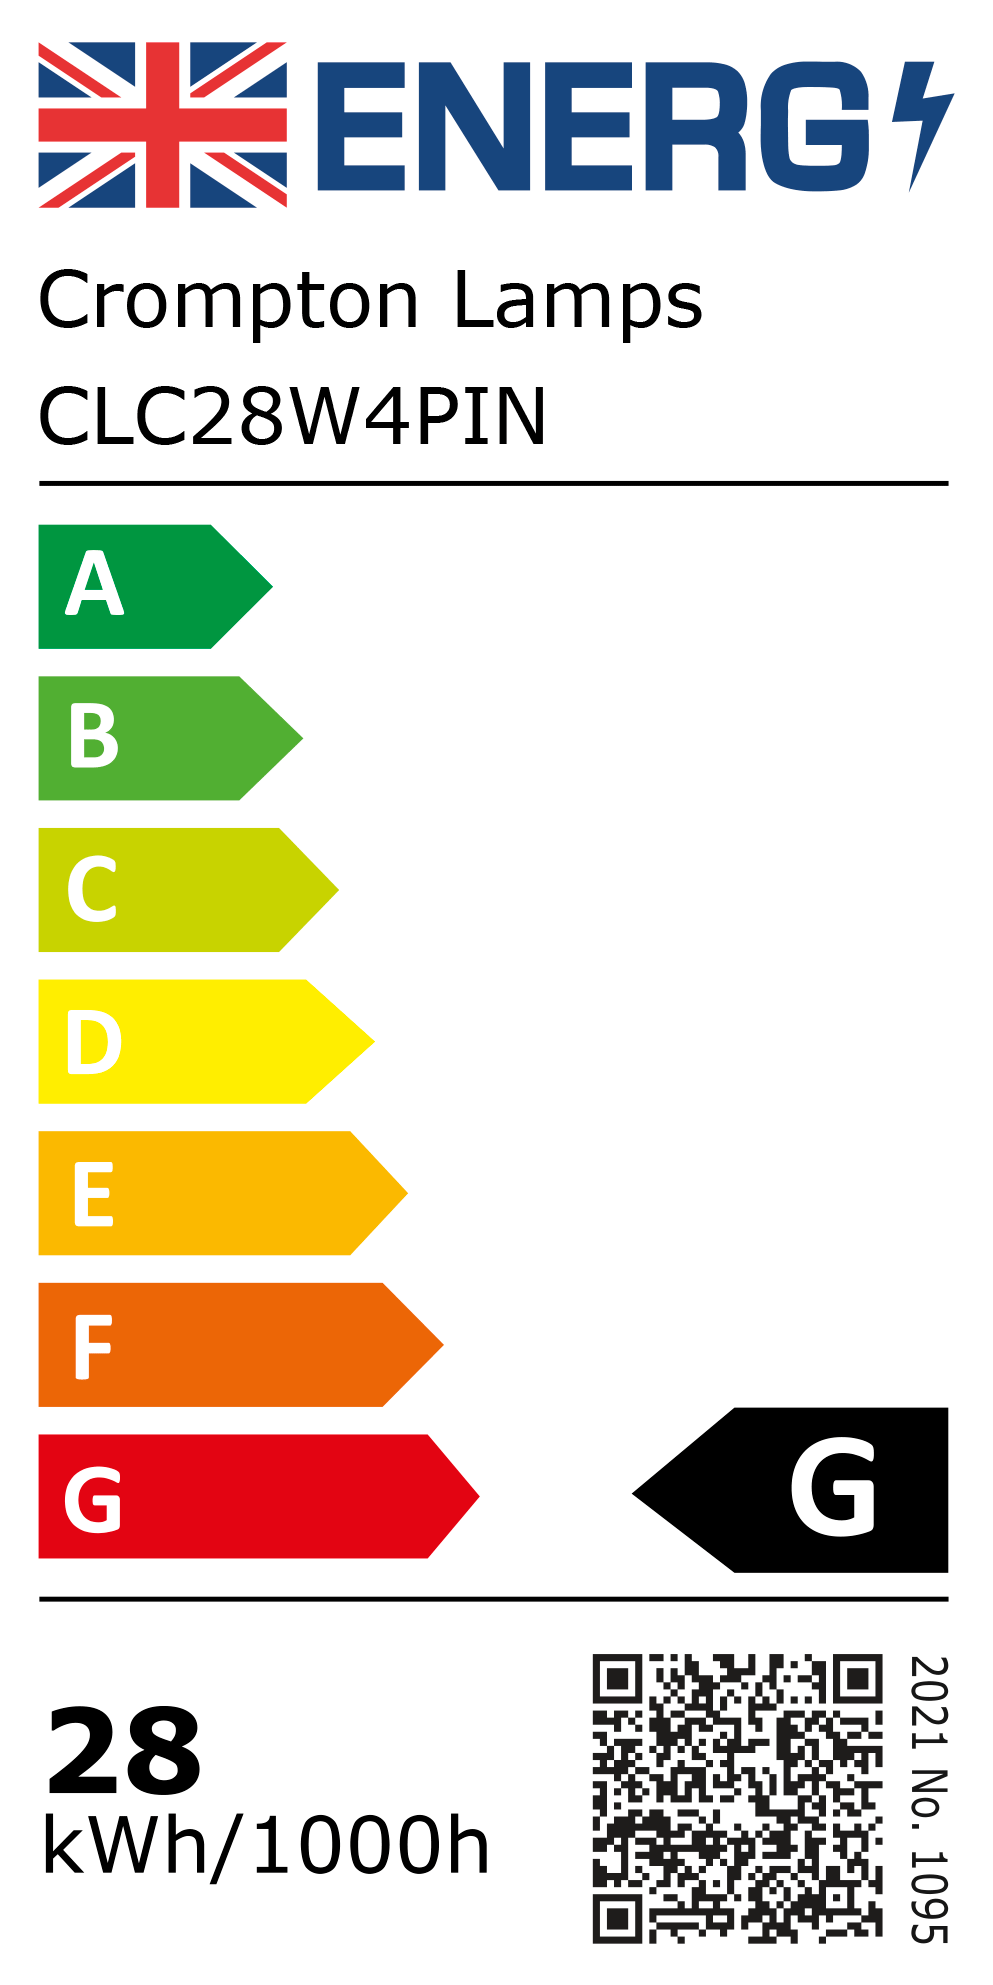 New 2021 Energy Rating Label: Stock Code CLC28W4PIN